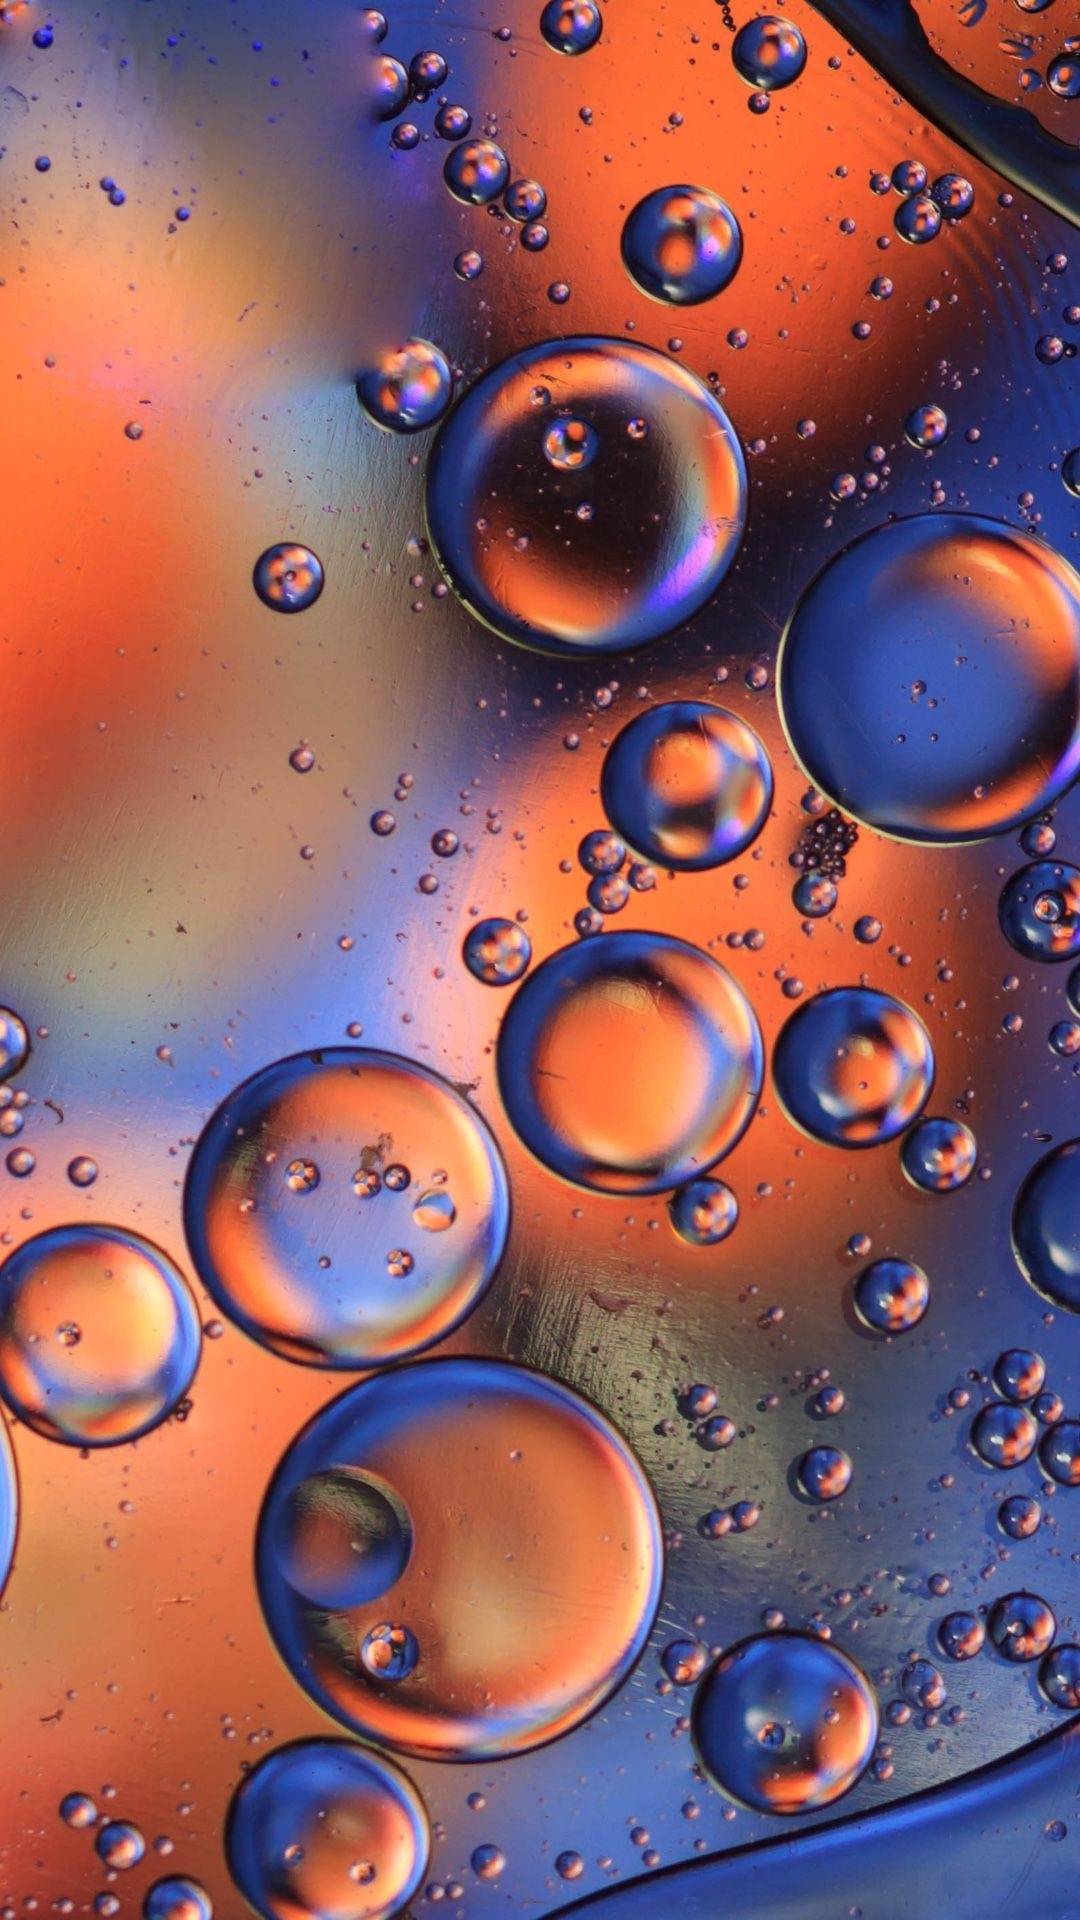 Bubbles Phone Wallpapers - Top Free Bubbles Phone Backgrounds 1080x1920